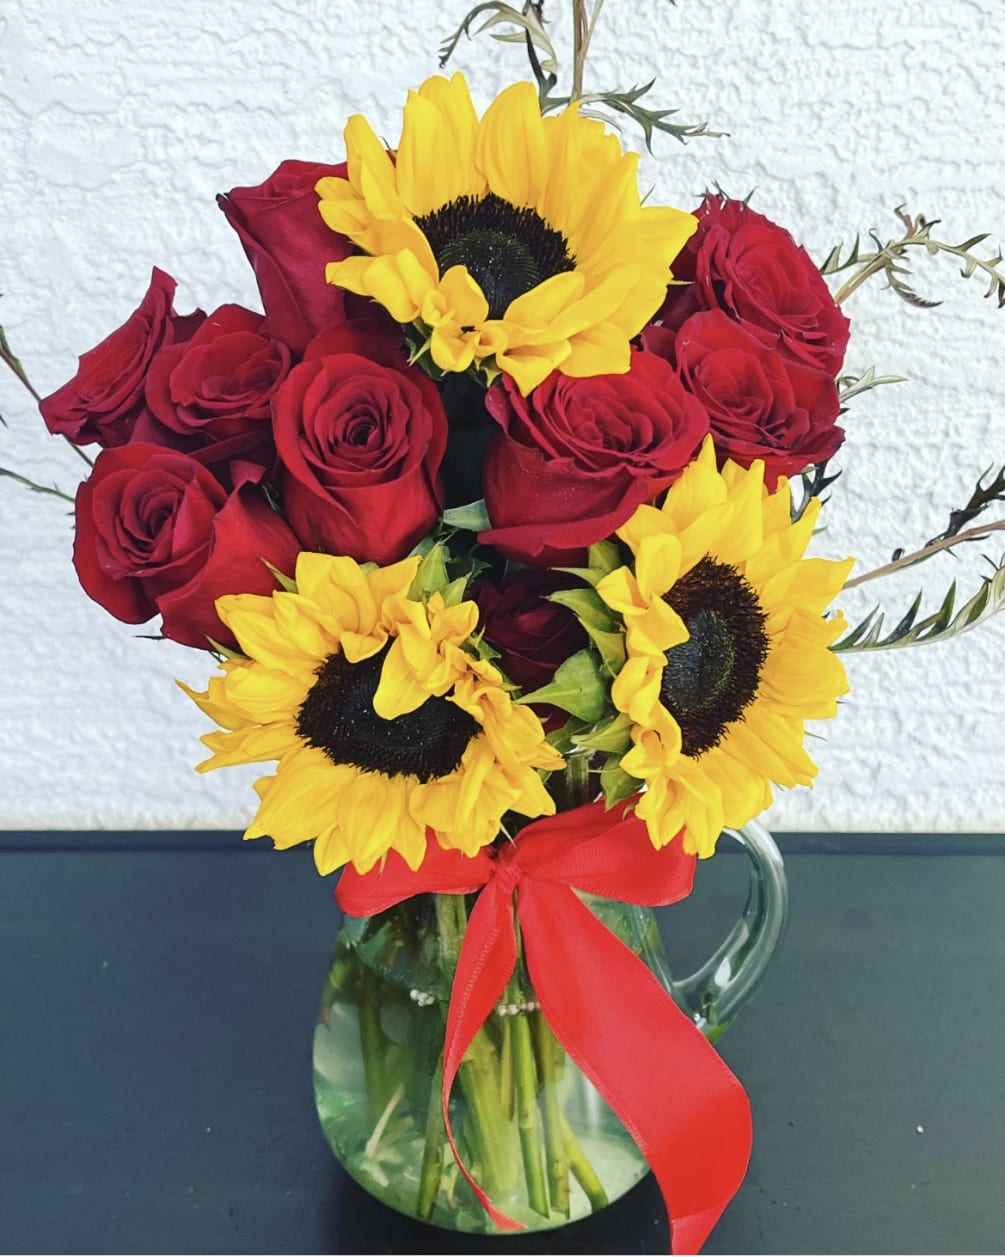  Dozen red roses and six sunflower
With our special and unique creations